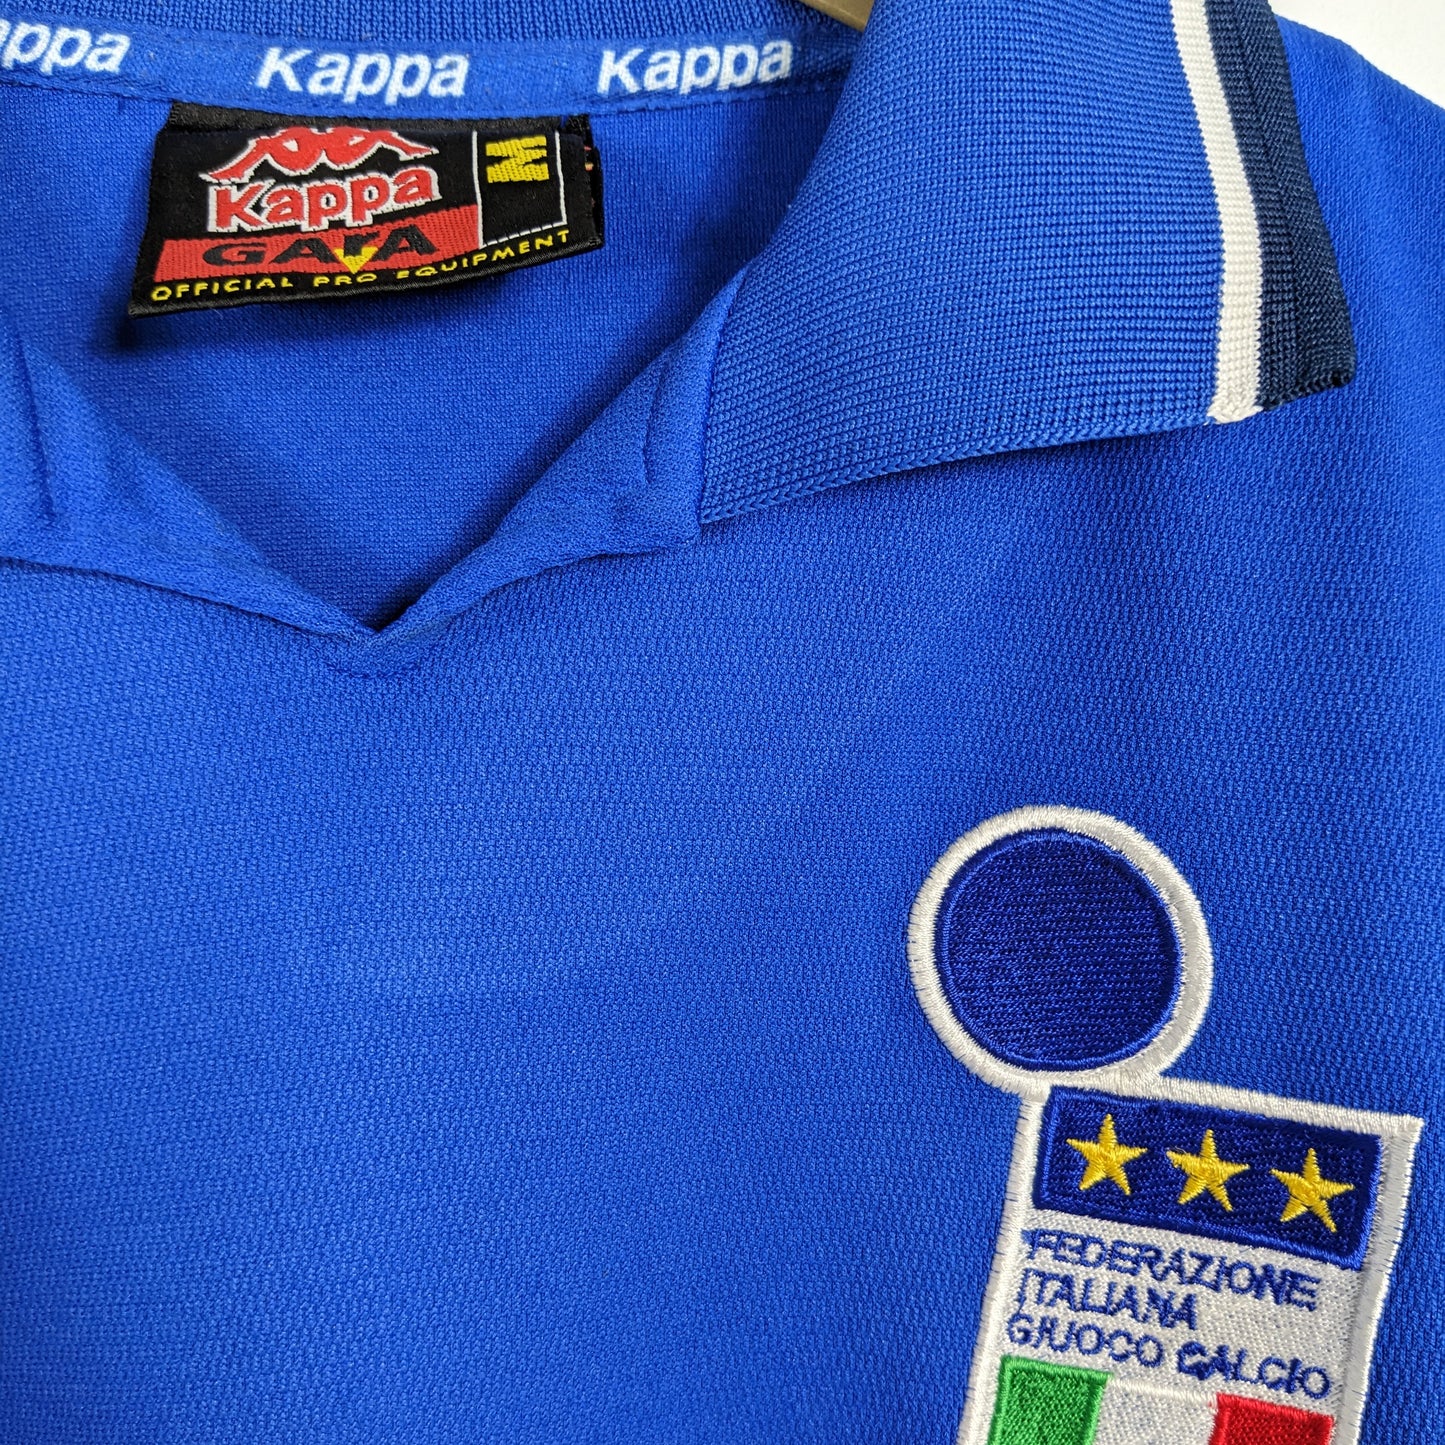 Authentic Italy Kappa Polo Shirt - Size M